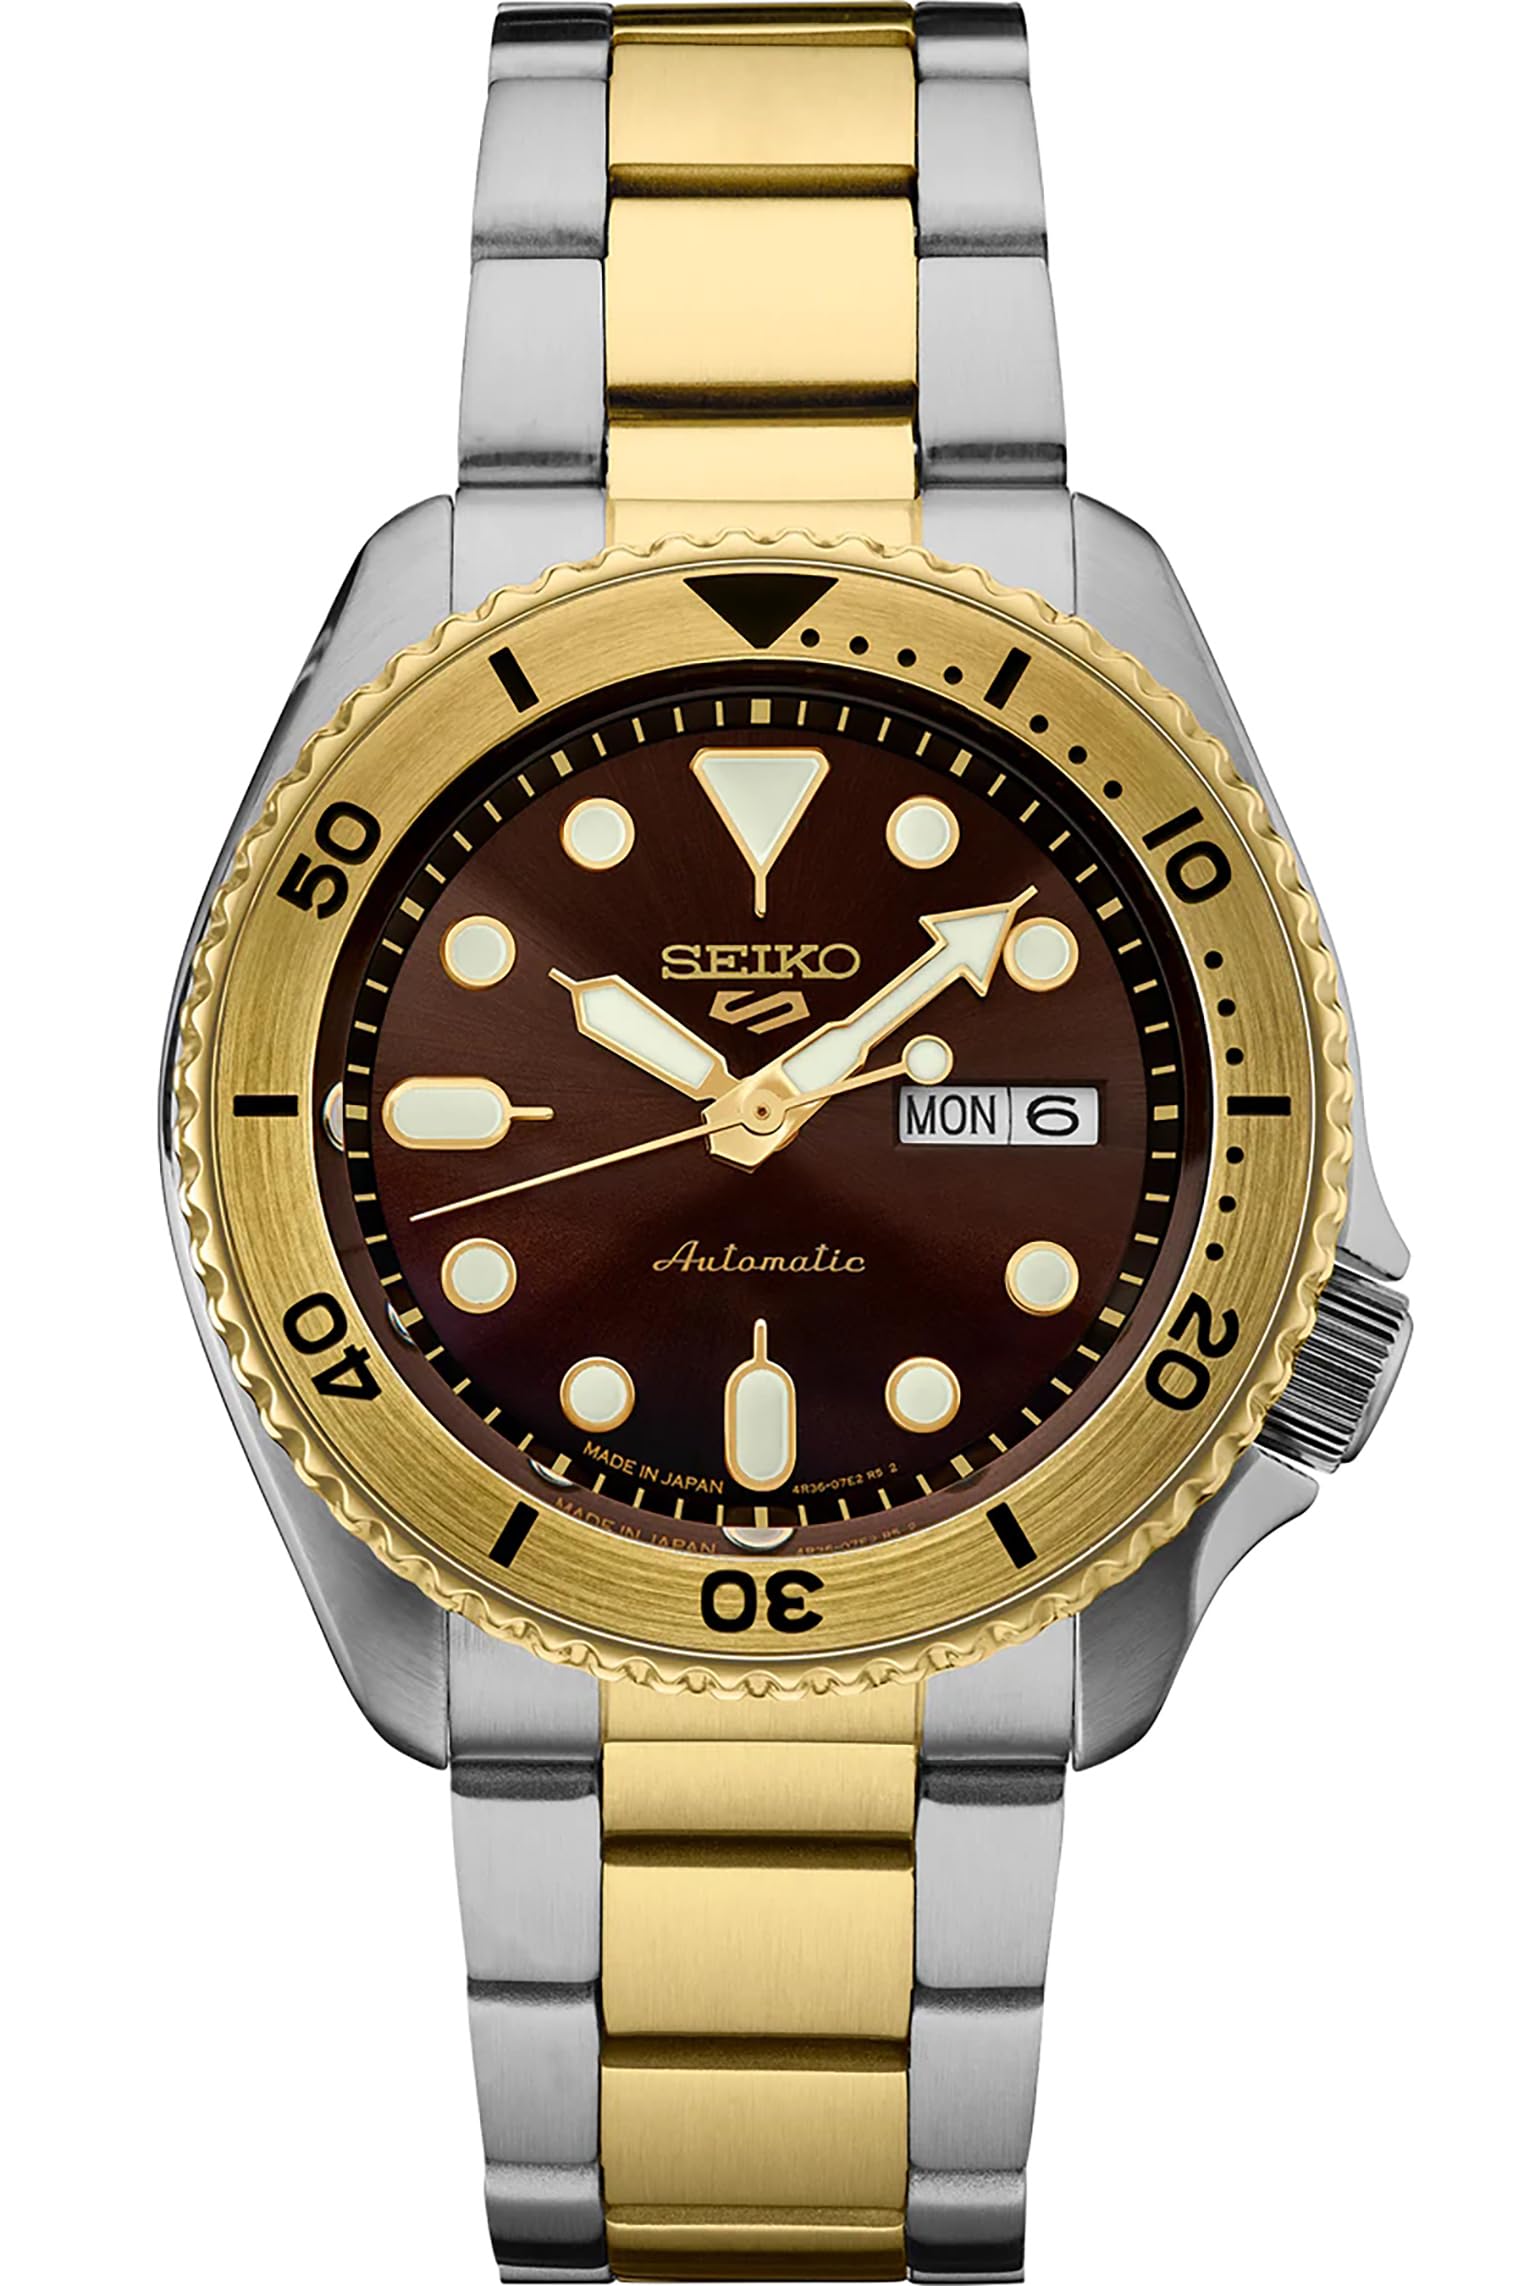 SEIKO SRPK24,Men Sport,GMT,Mechanical,Automatic,Stainless,Two Tone,Brown Dial,100m WR